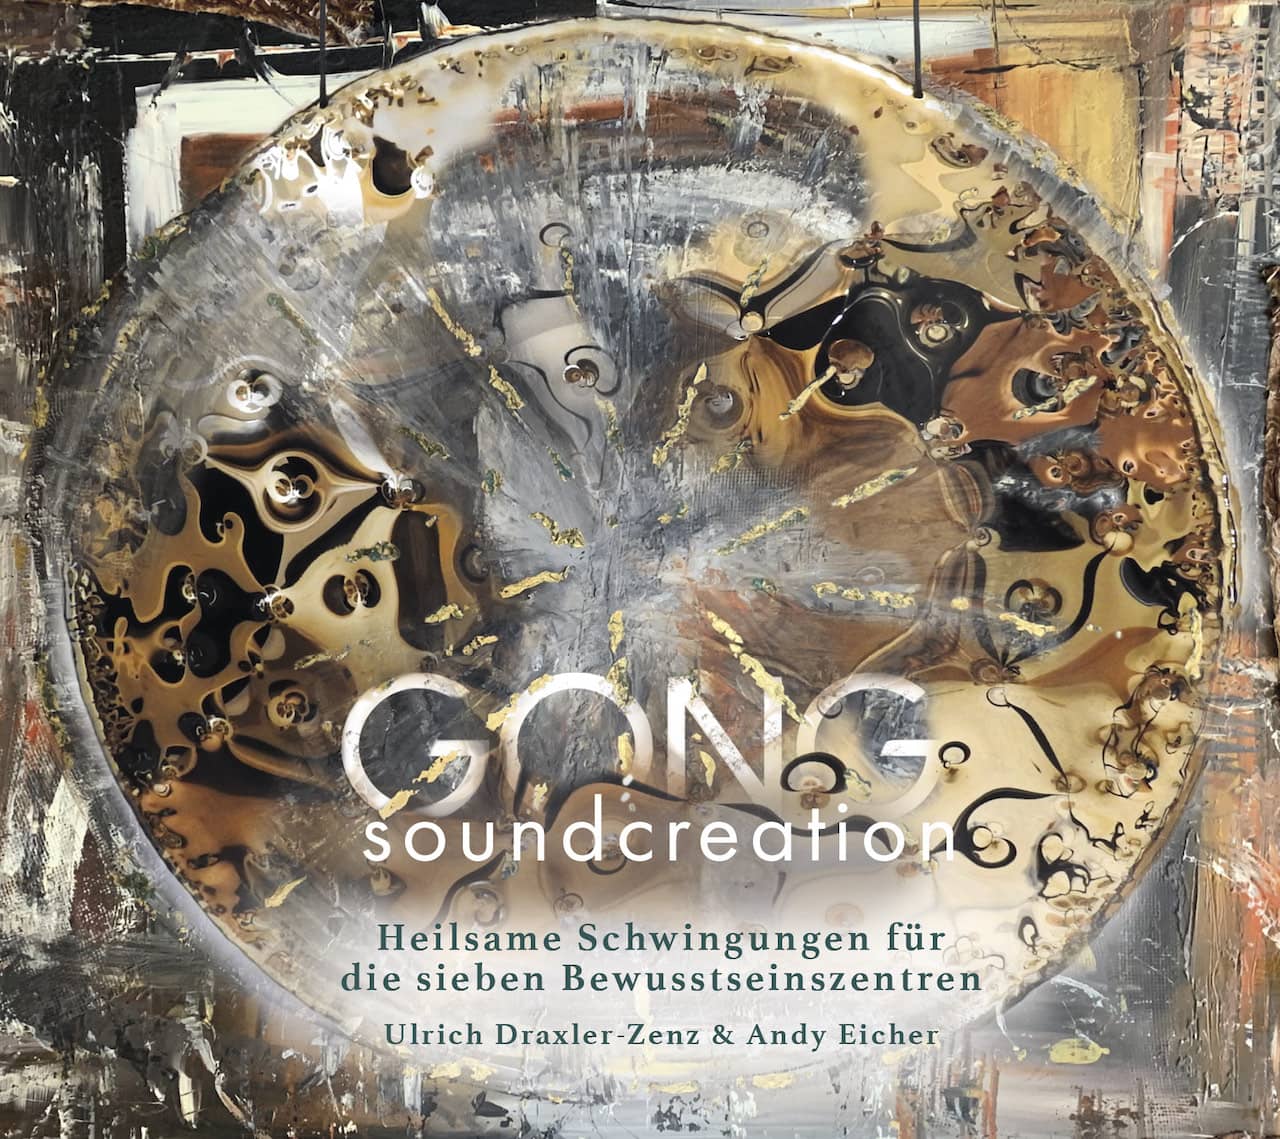 Gong soundcreation Cover